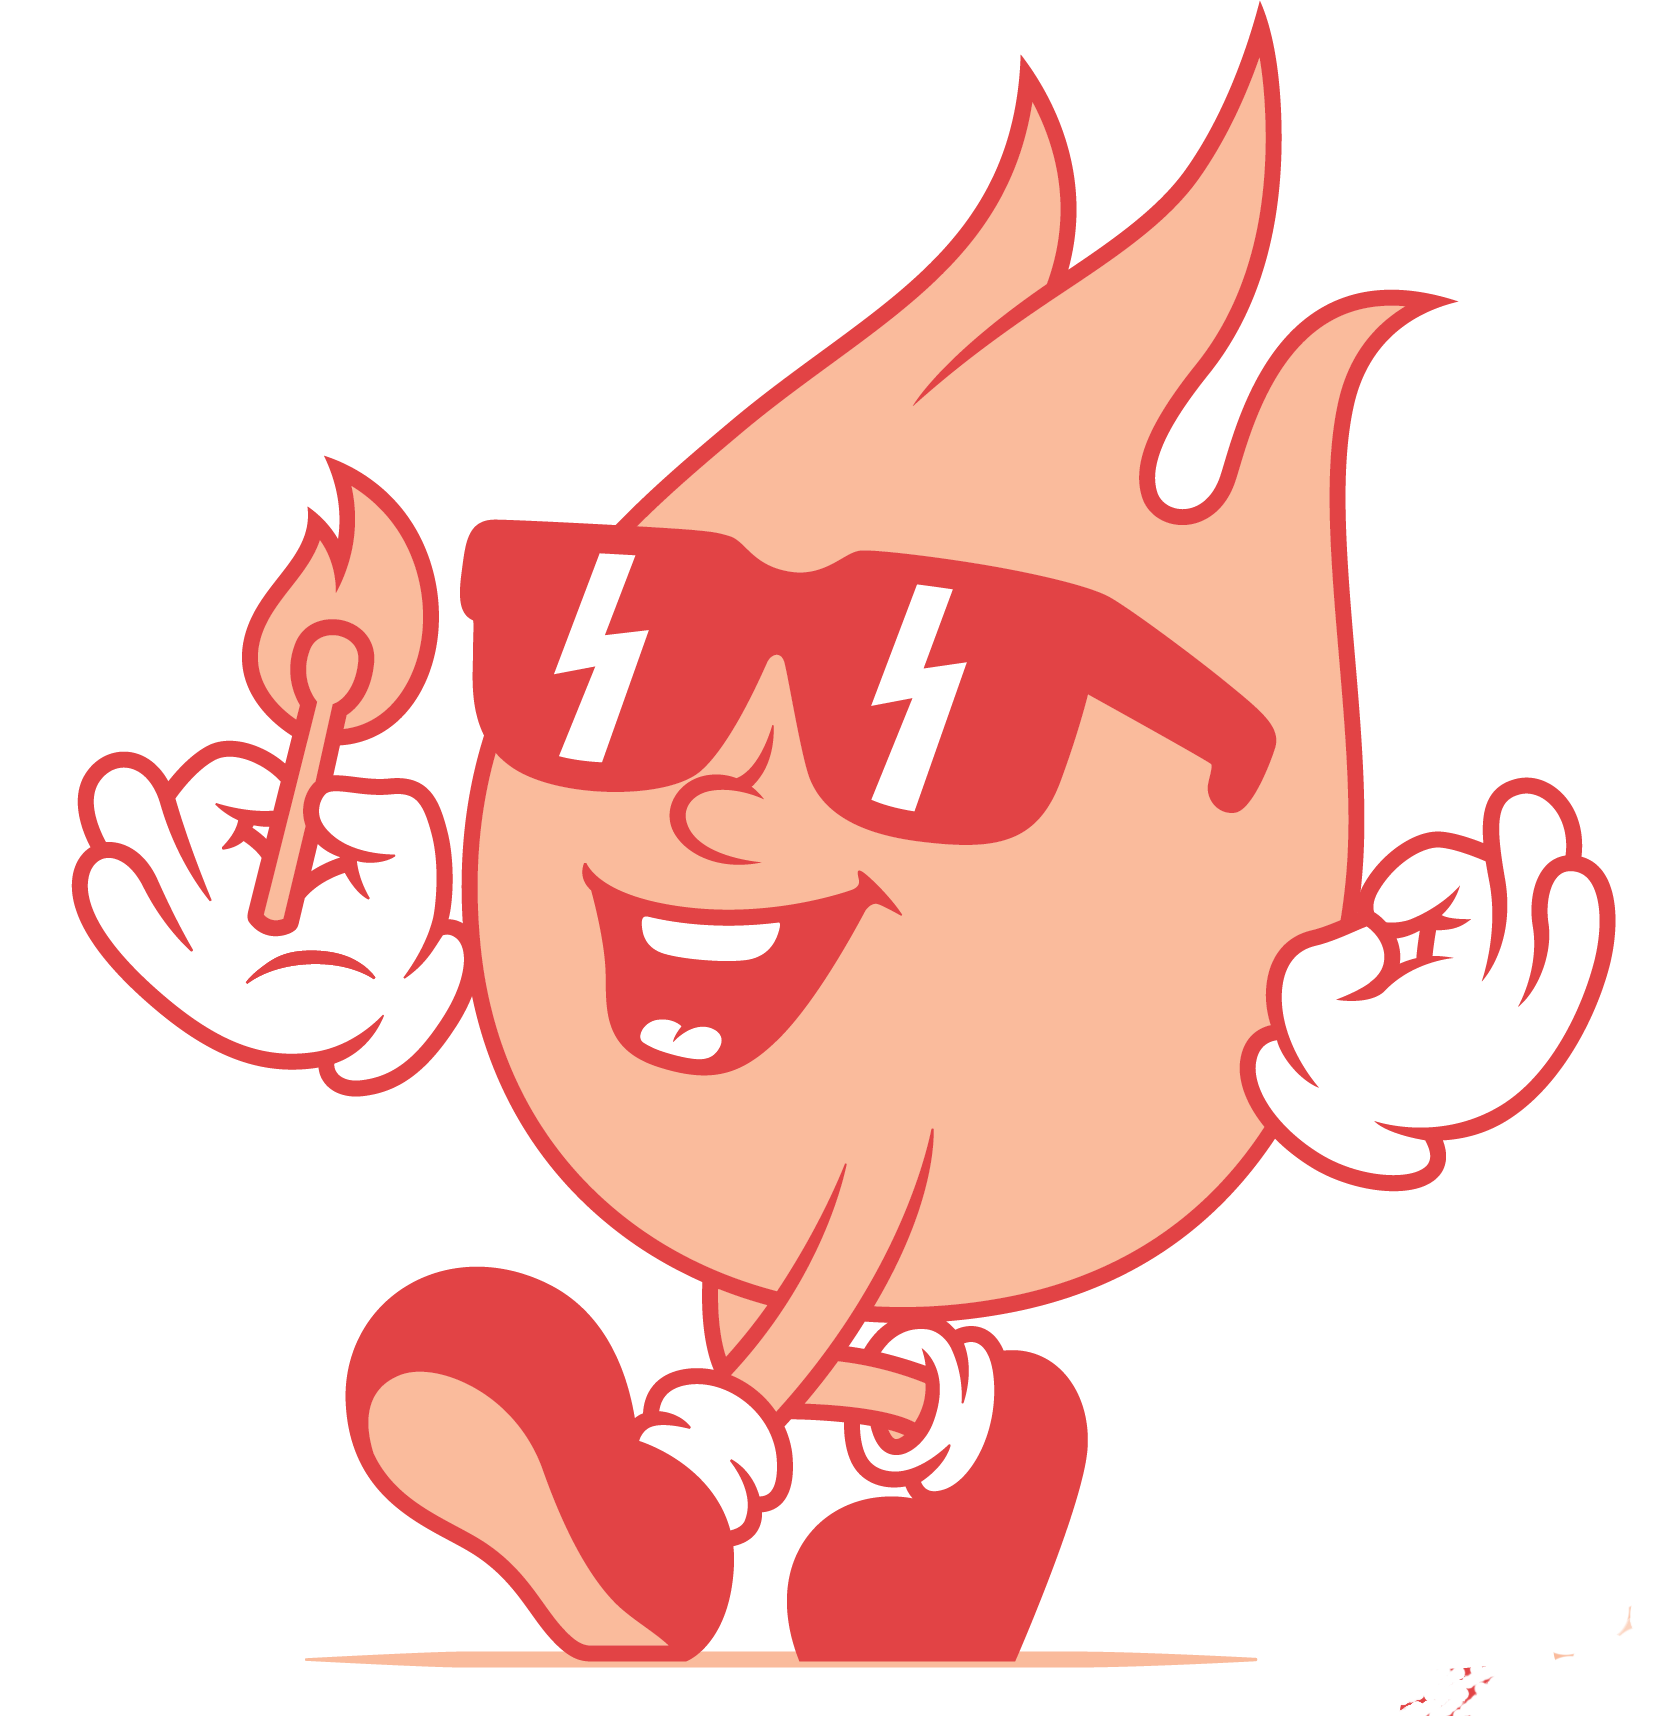 A Matchsticks Mascot wearing sunglasses and holding a torch.